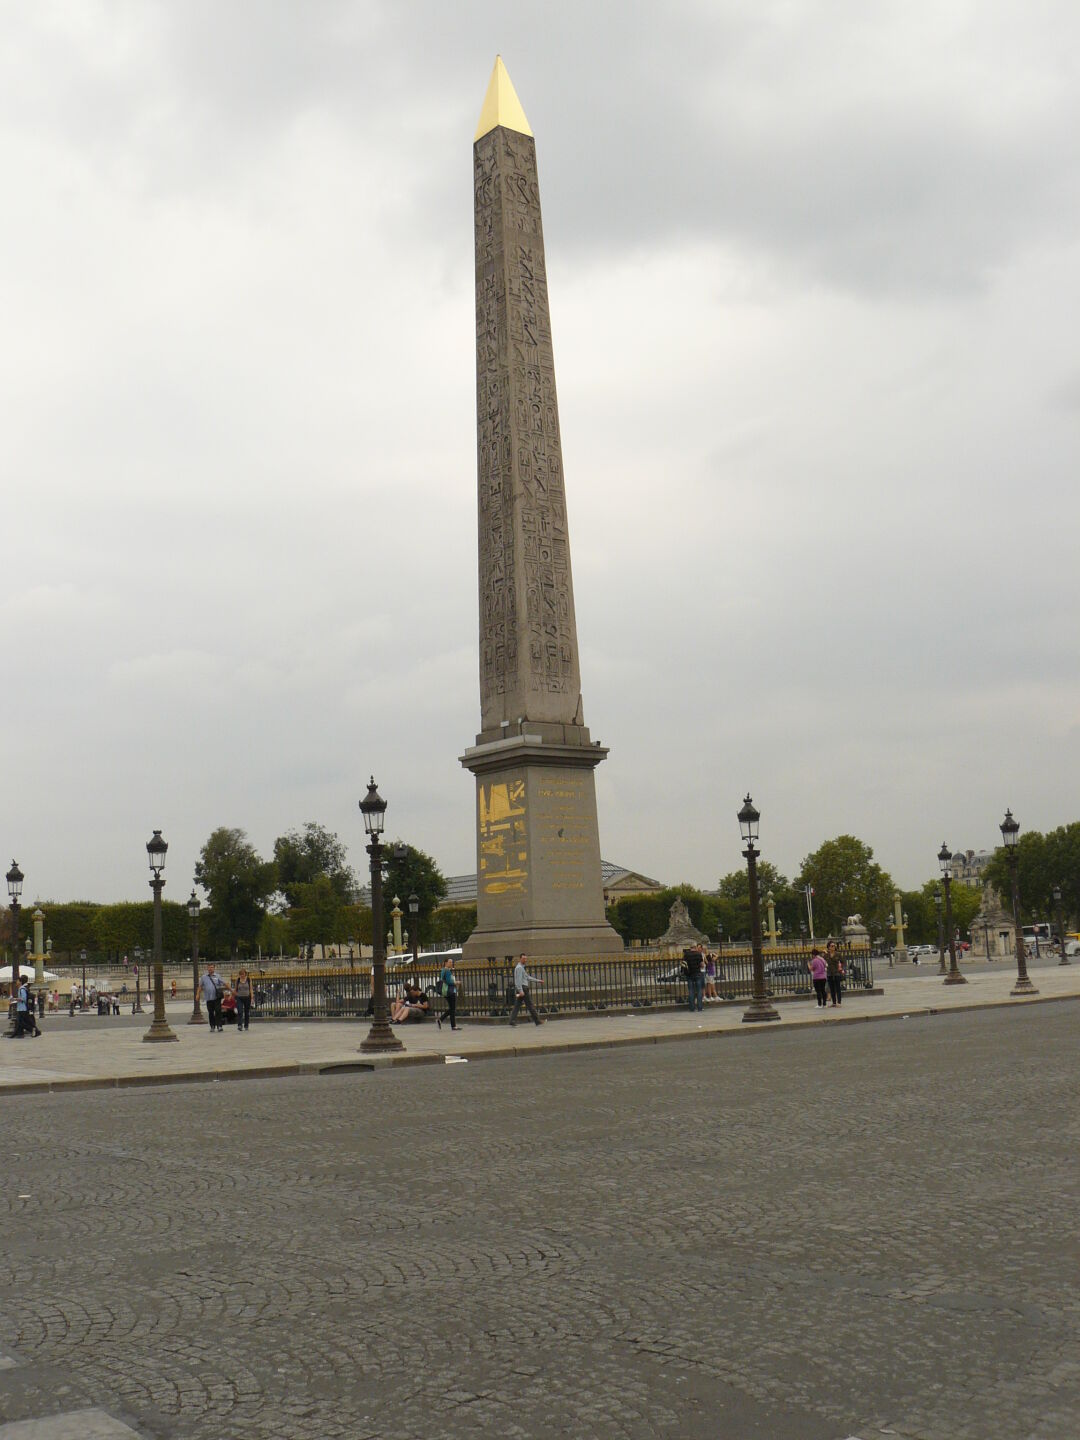 One of the few things not robbed from somewhere, this obelisk was presented to France by Egypt.